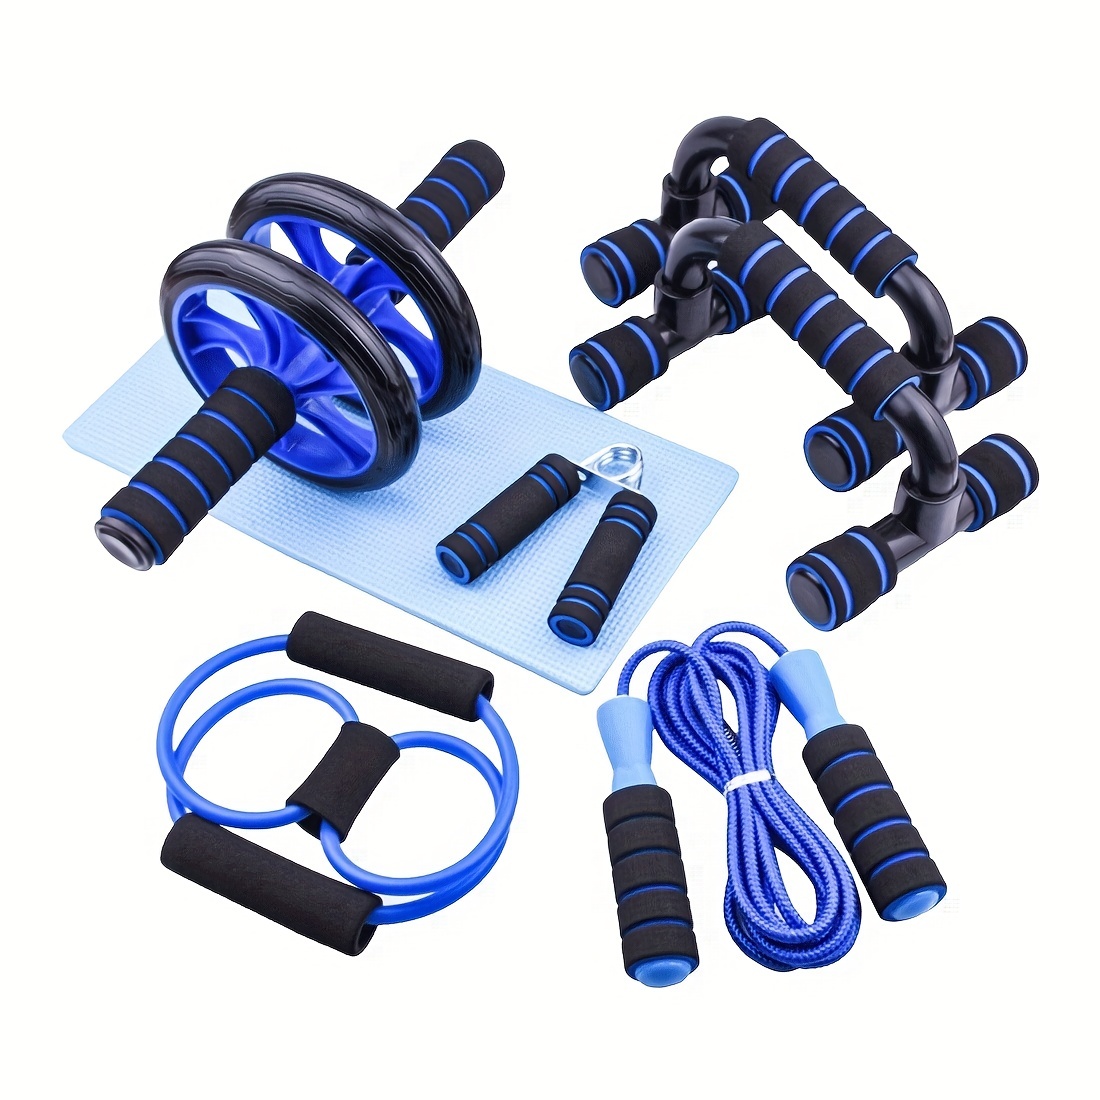 

7pcs/set Fitness Equipments Set, Push Up Bar, Ab Roller, Resistance Band With Handle, Jump Rope, Hand Gripper And Fitness Mat